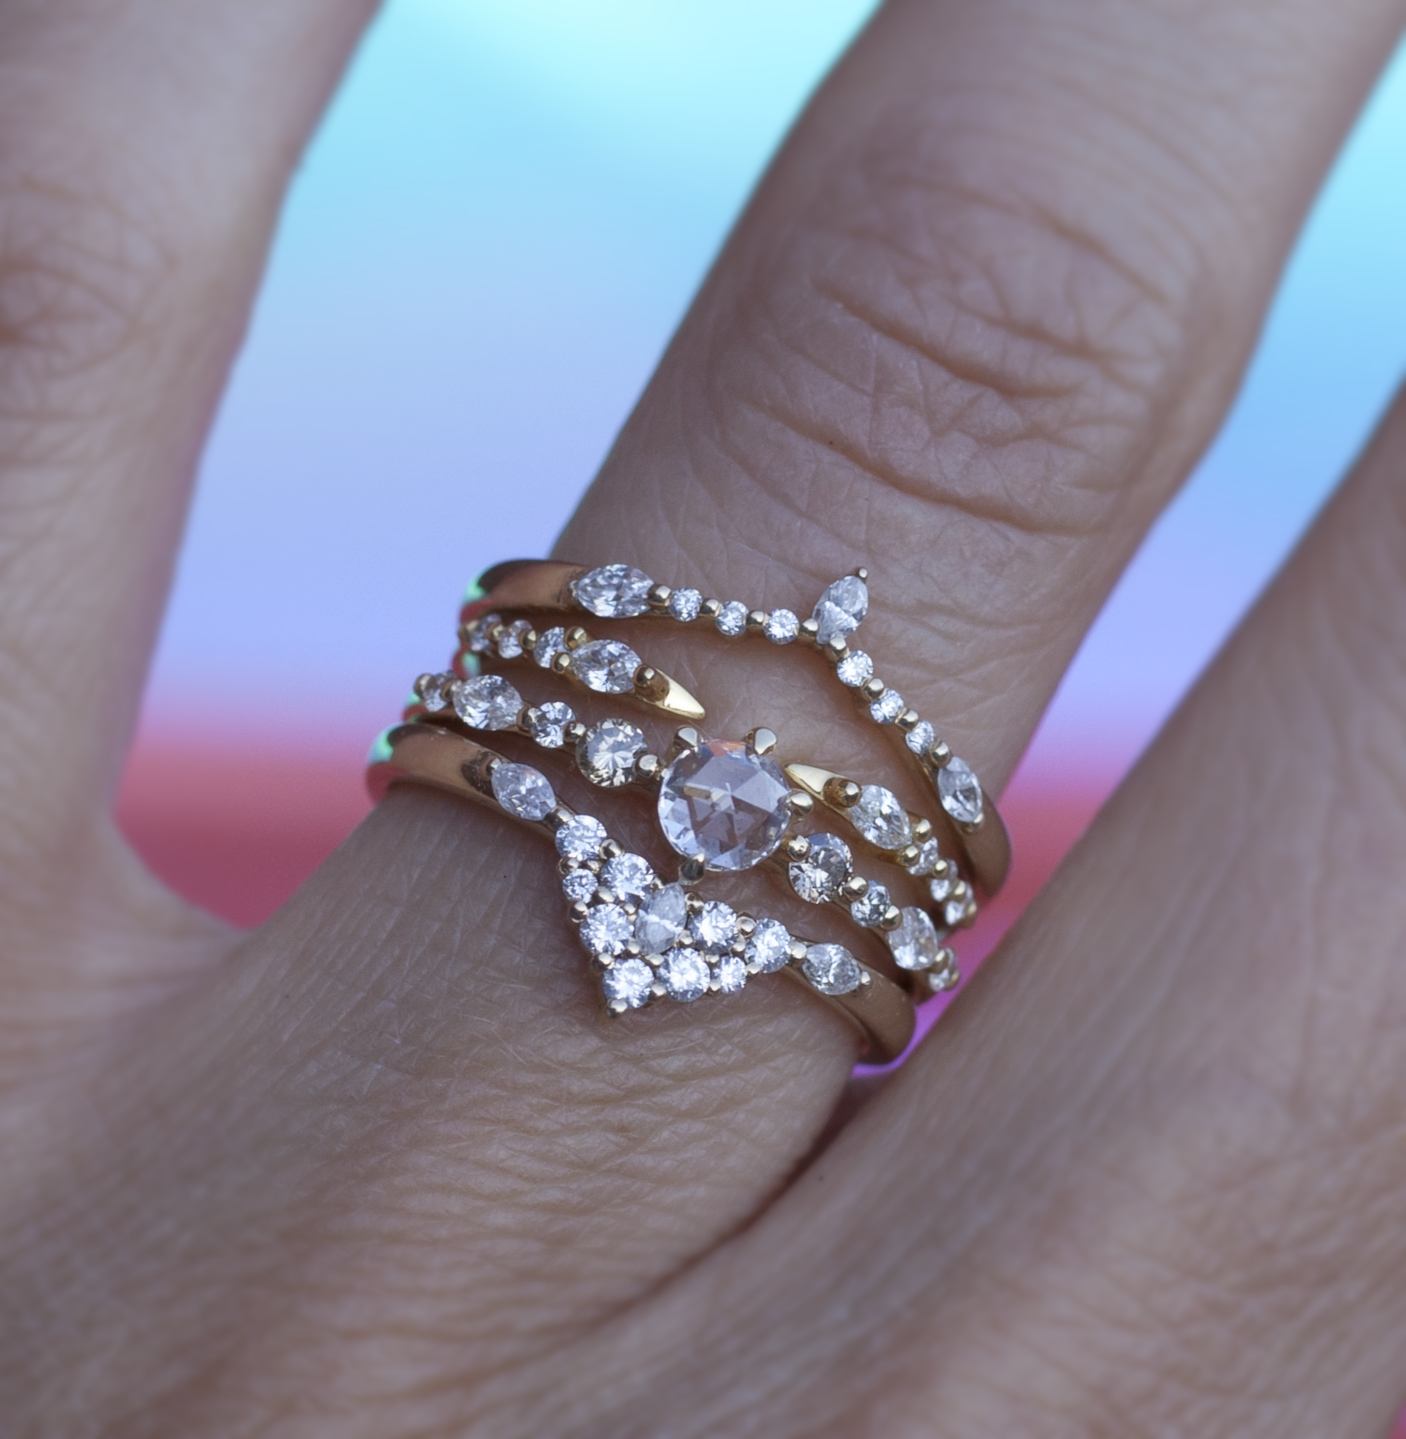 Diamond solitaire spirit dust ring stacked with three diamond bands modeled on hand.